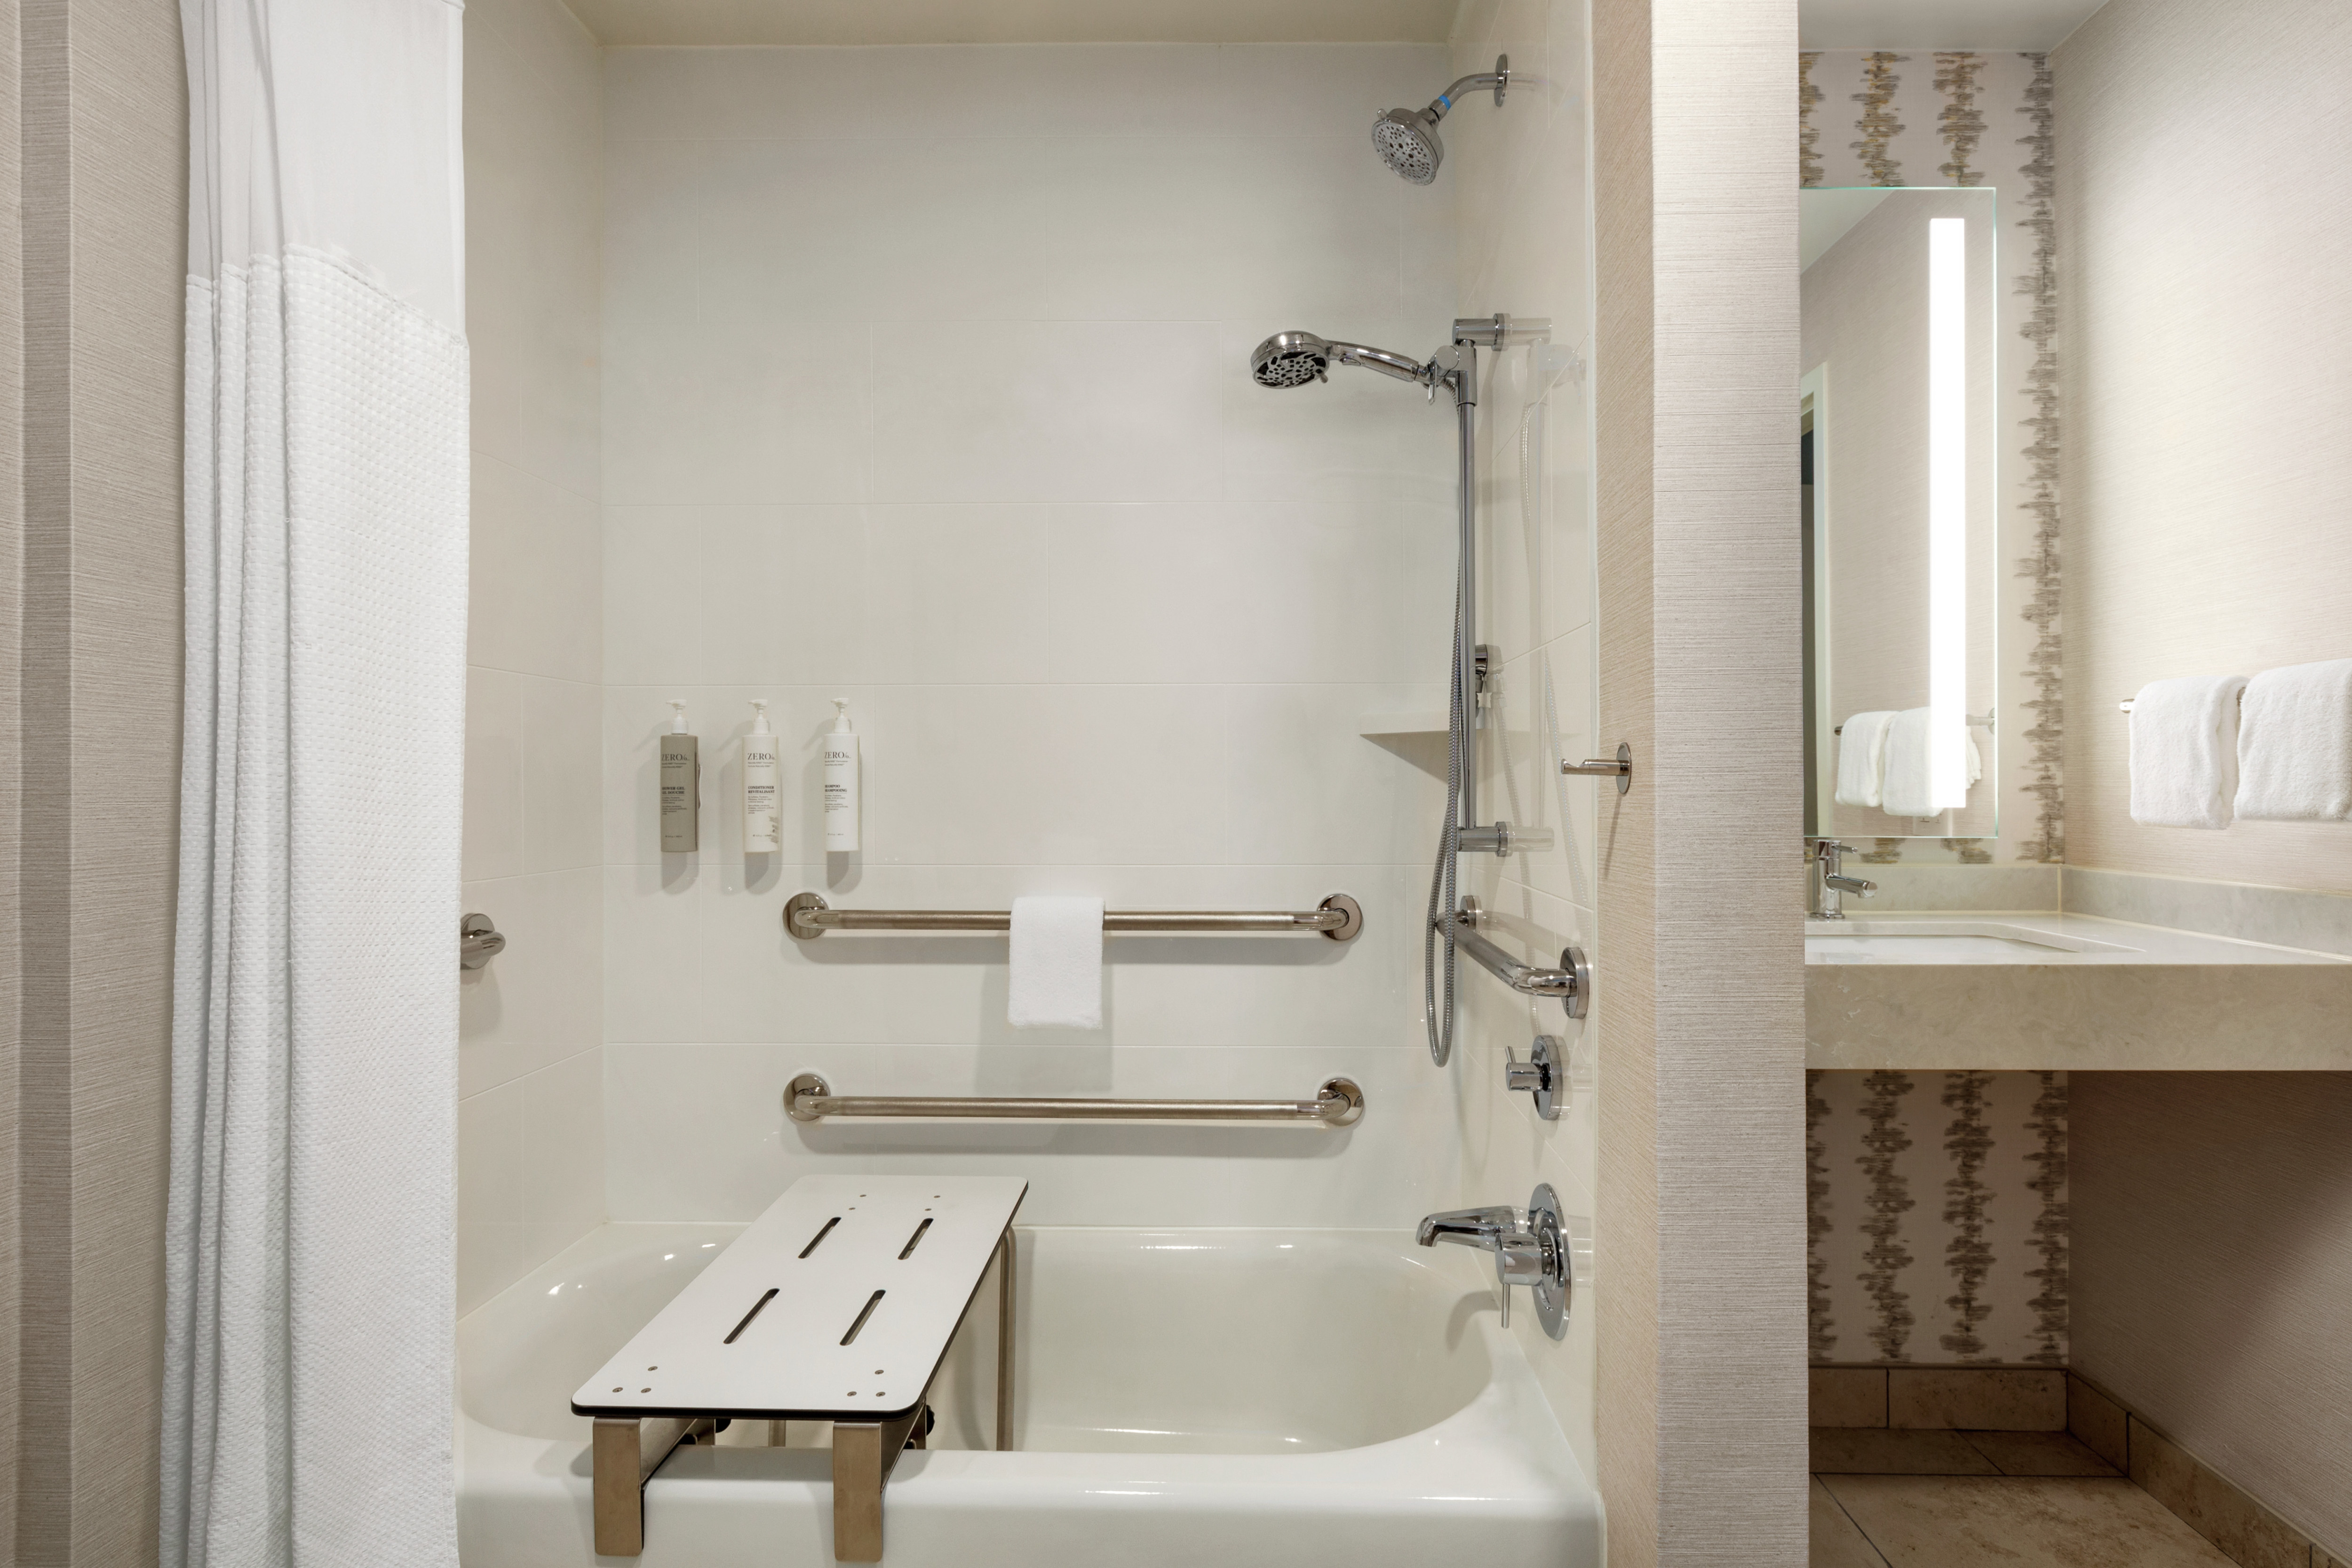 Spacious accessible bathroom featuring tub with seat and grab bars for guest safety.